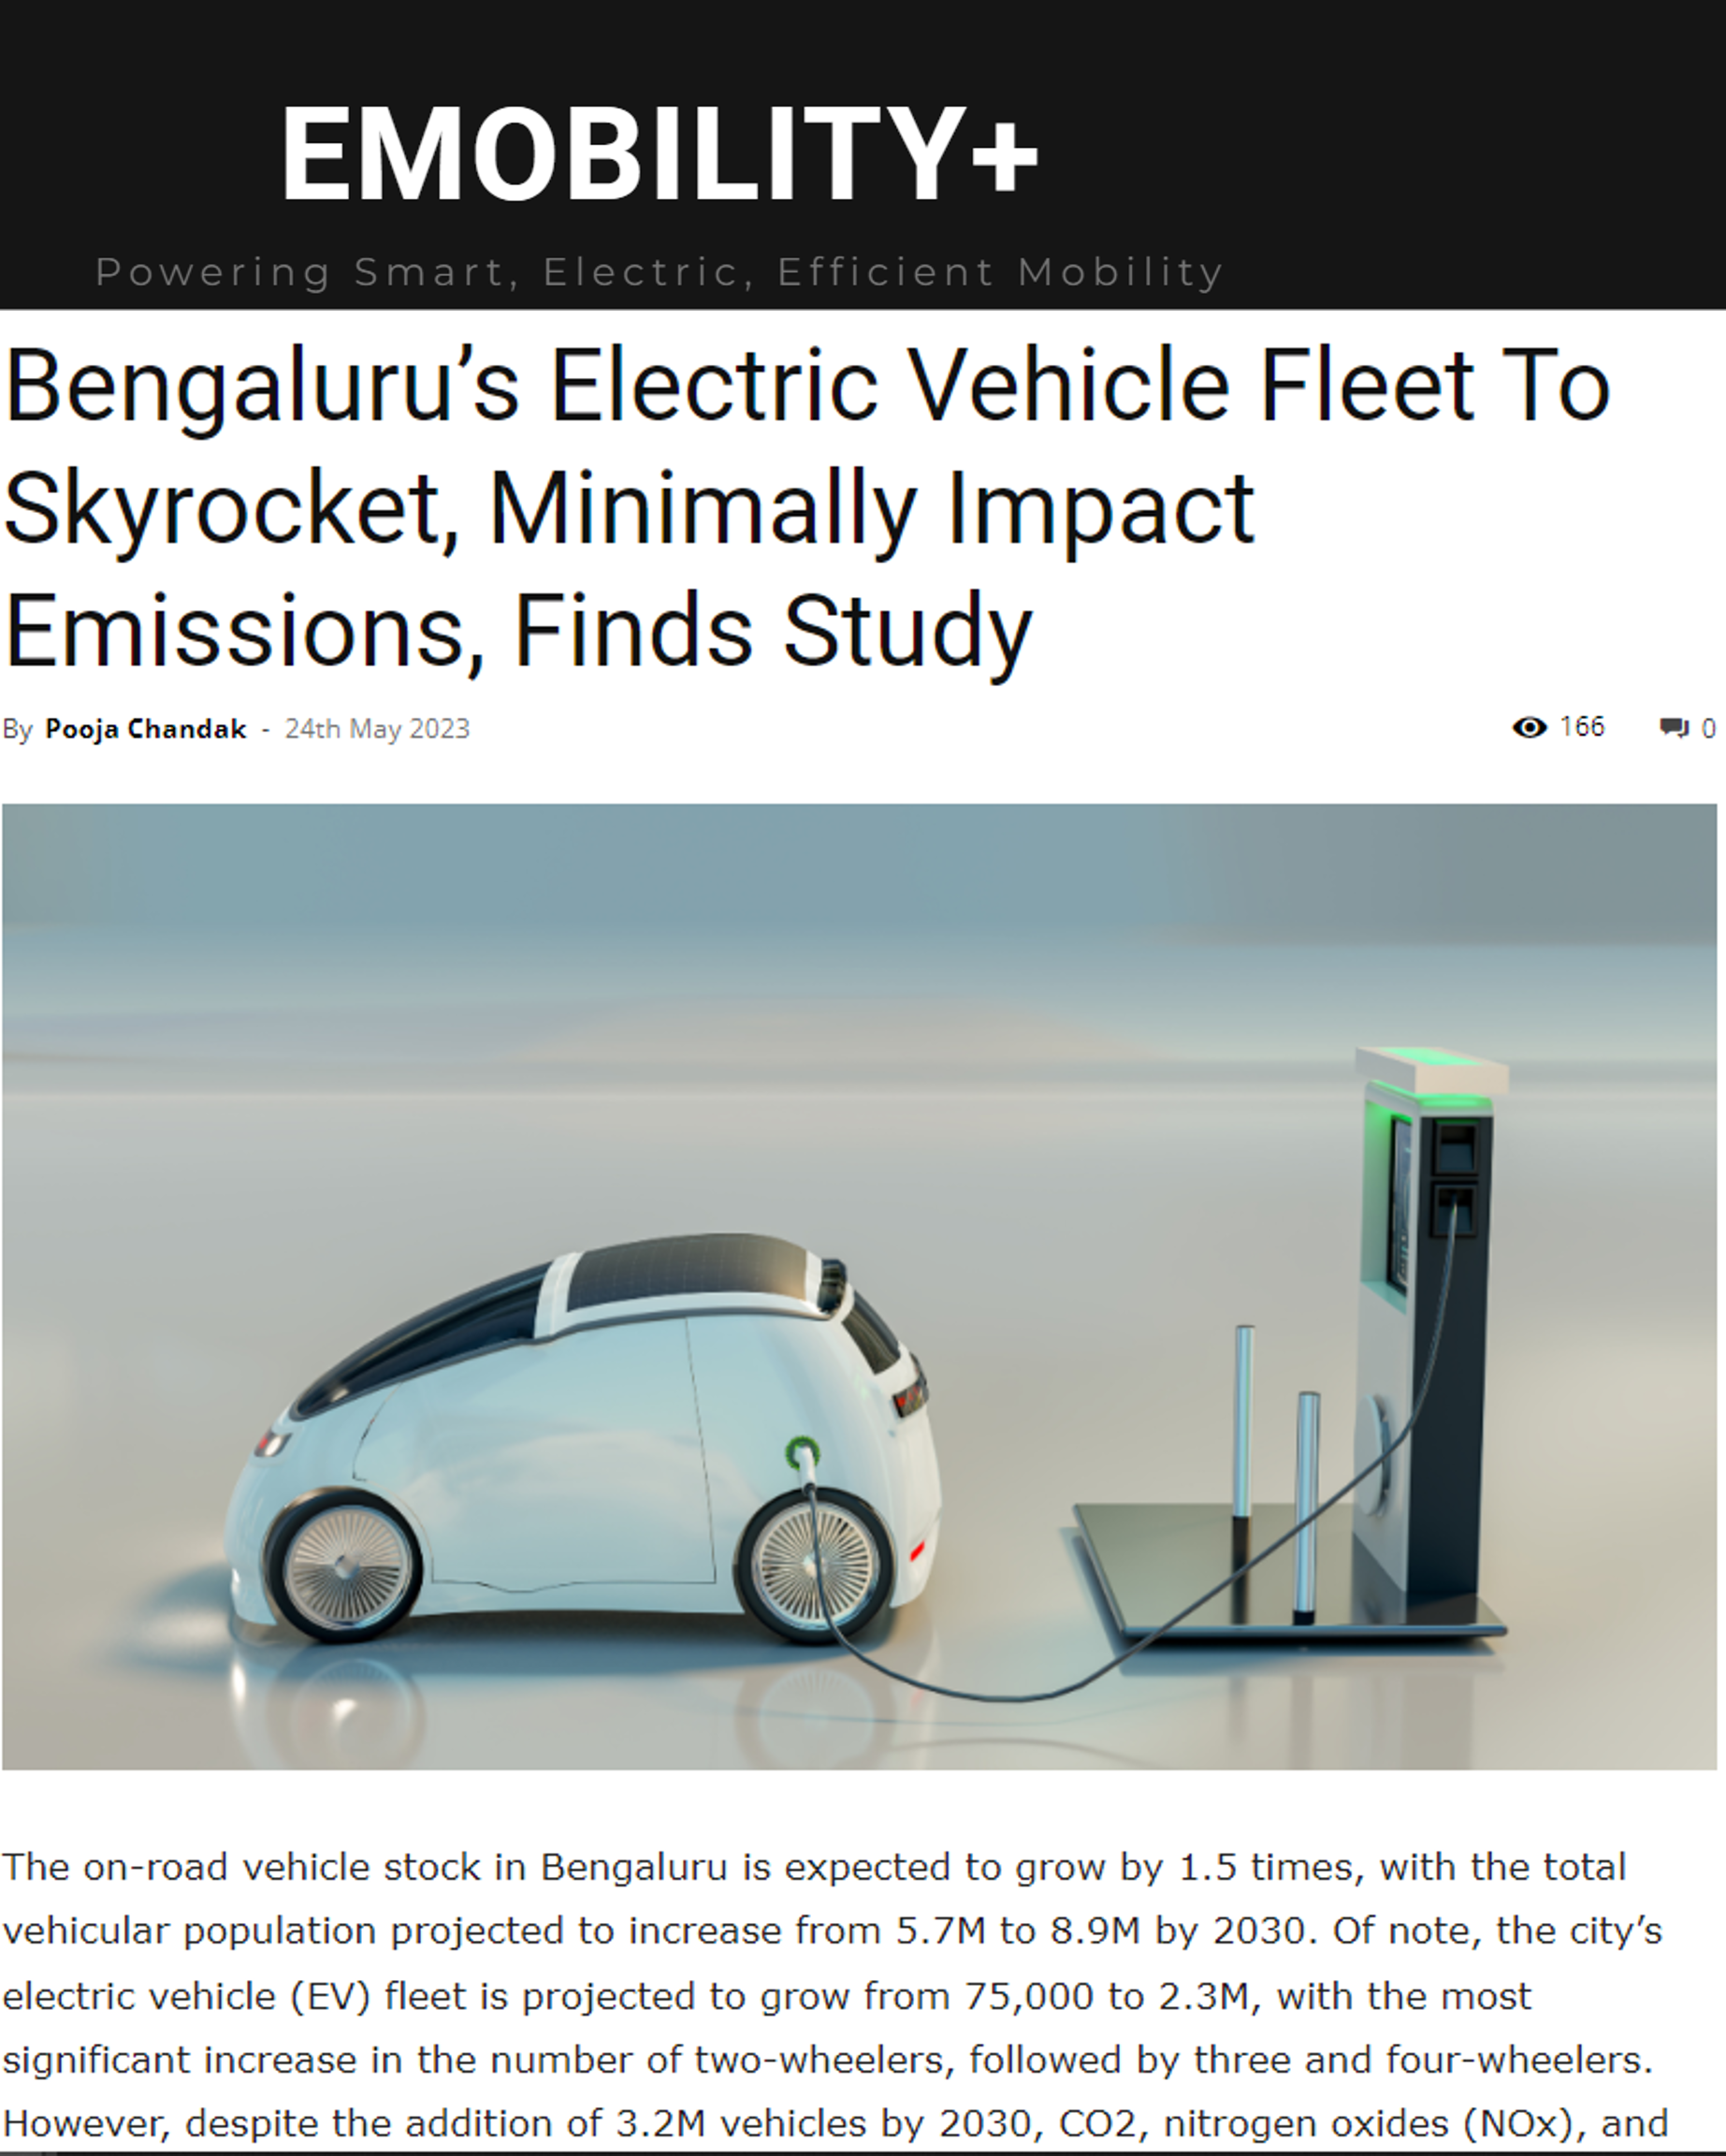 CSTEP’s study on the increasing electric vehicle fleet in Bengaluru covered by EMobility+